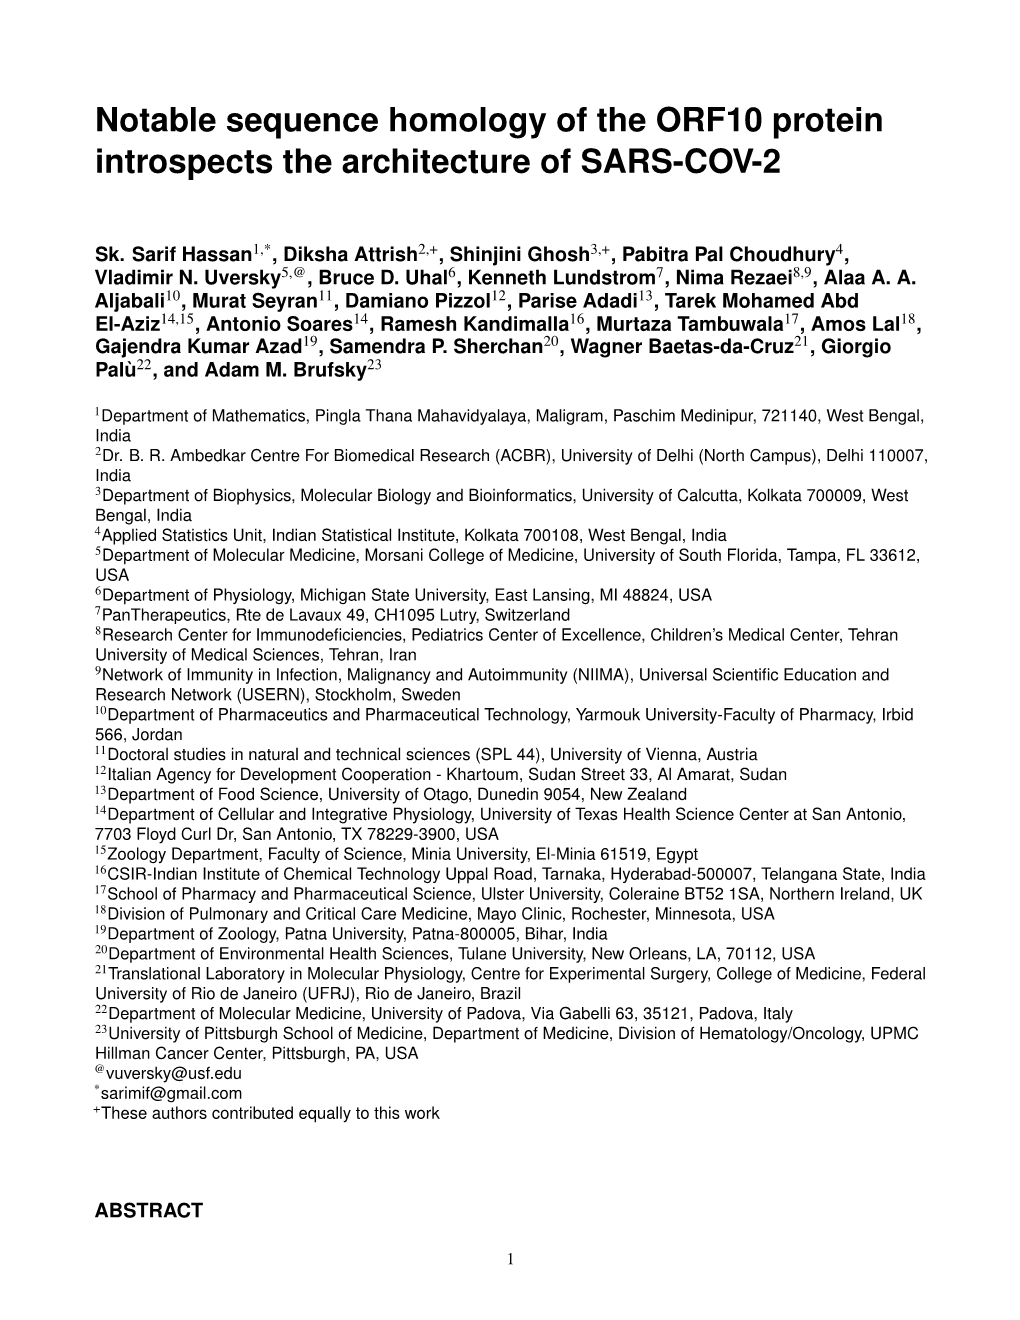 Notable Sequence Homology of the ORF10 Protein Introspects the Architecture of SARS-COV-2